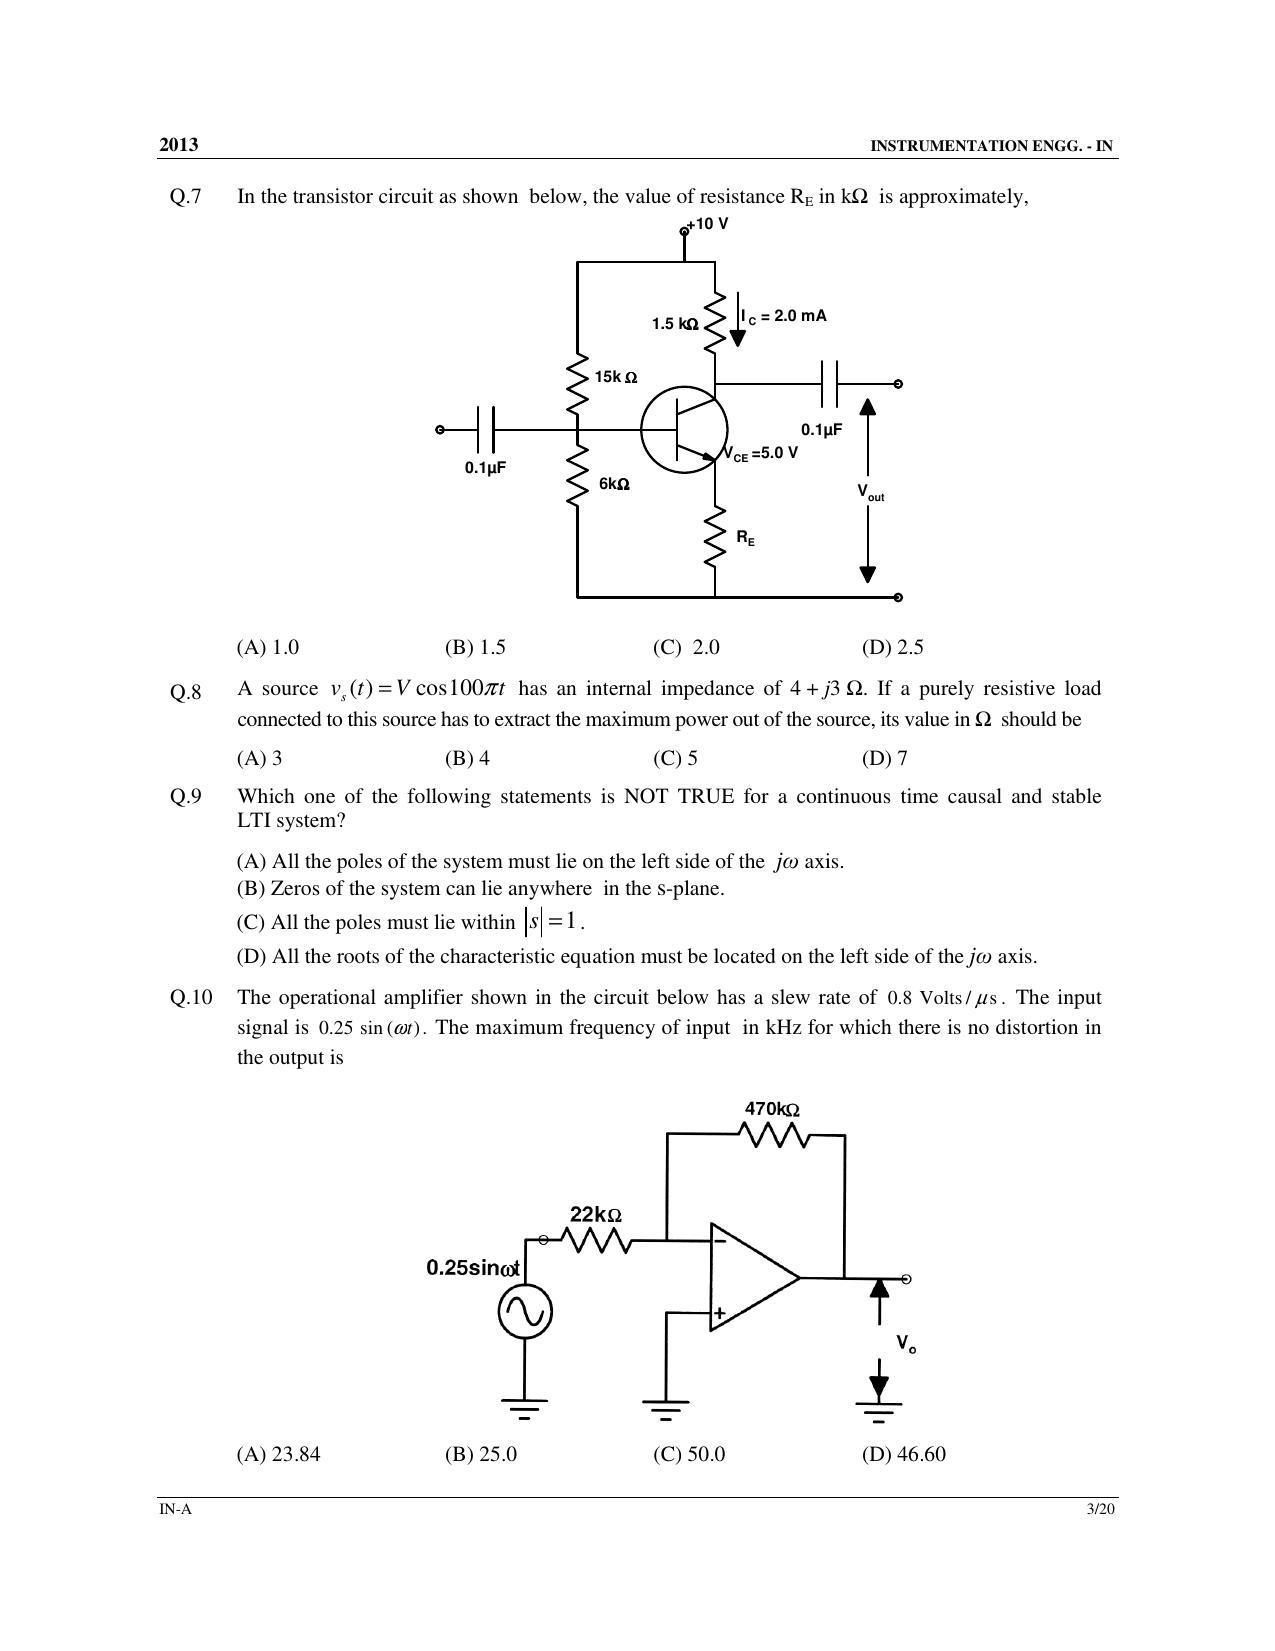 GATE 2013 Instrumentation Engineering (IN) Question Paper with Answer Key - Page 4